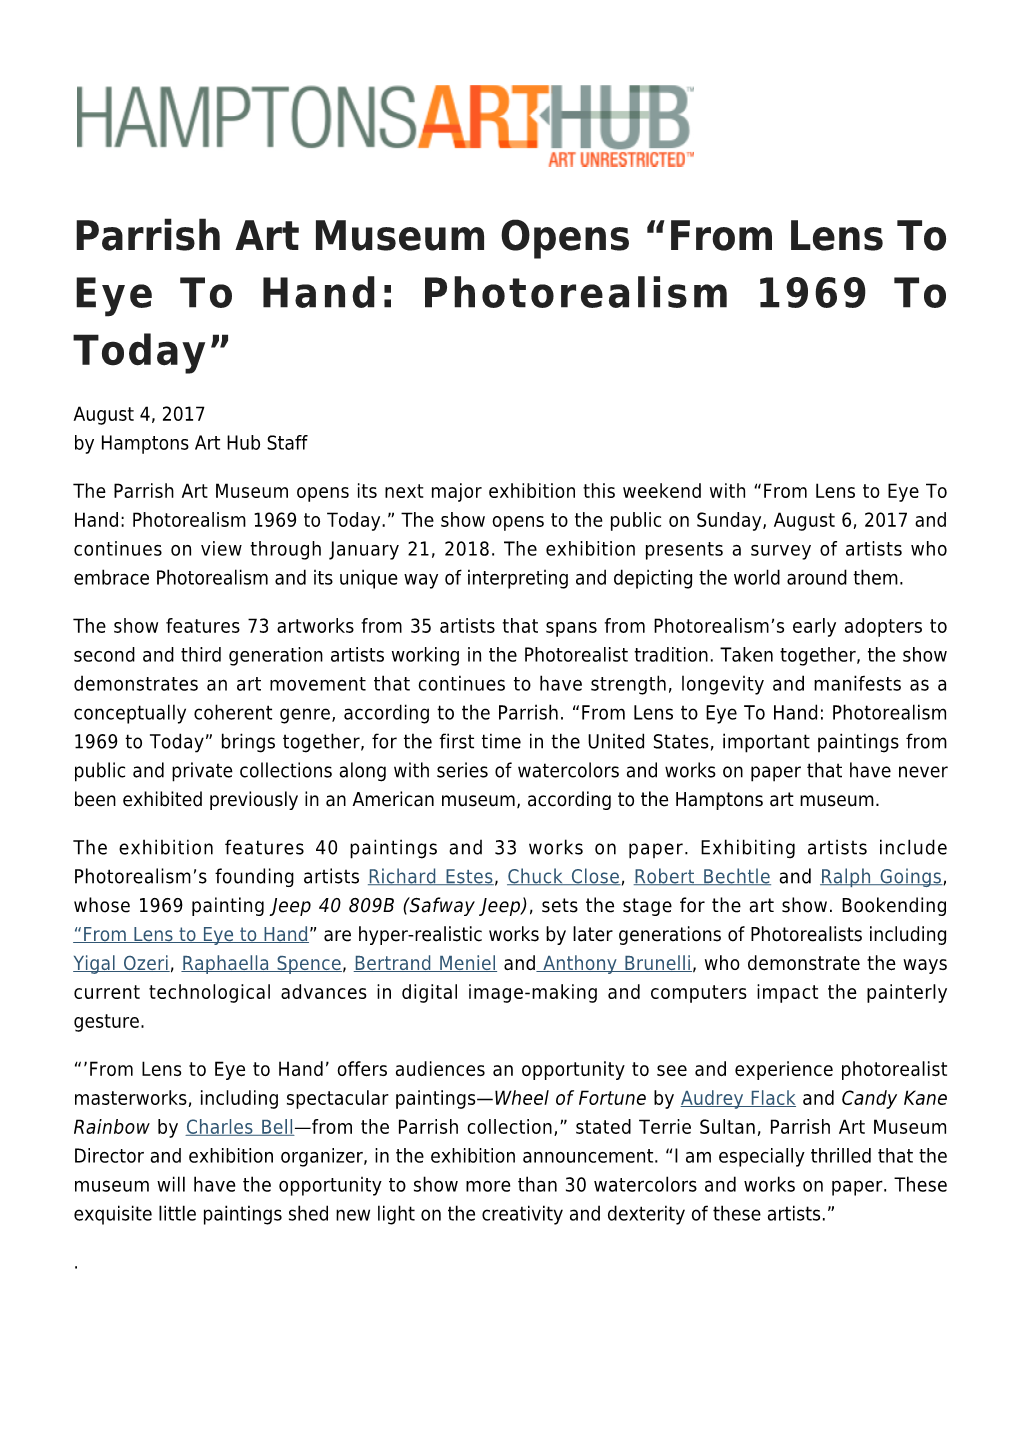 Parrish Art Museum Opens “From Lens to Eye to Hand: Photorealism 1969 to Today”